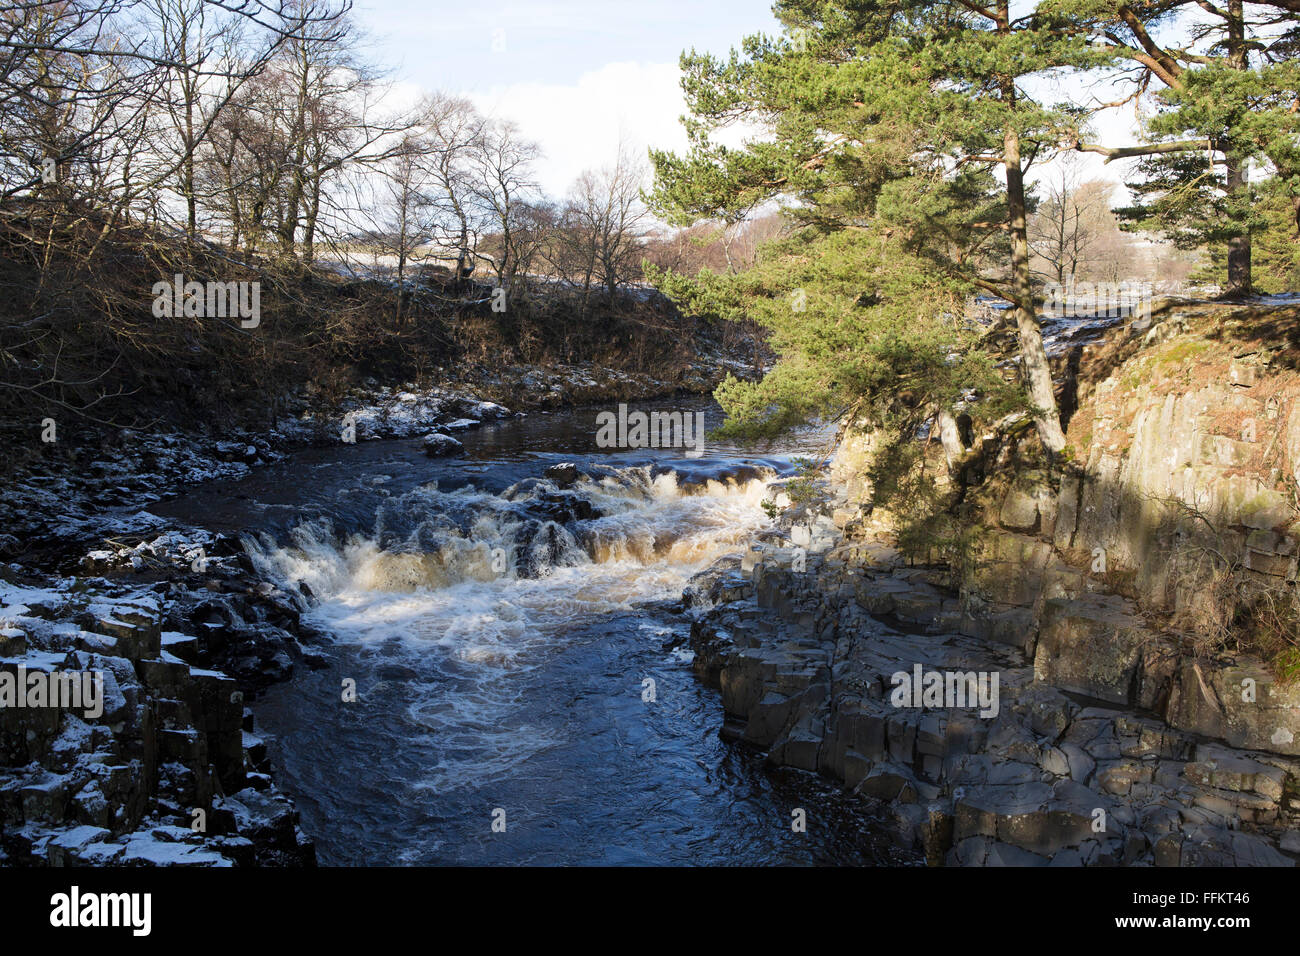 Rapids on the River Tees at Upper Teesdale in County Durham, England. The water runs white. Stock Photo